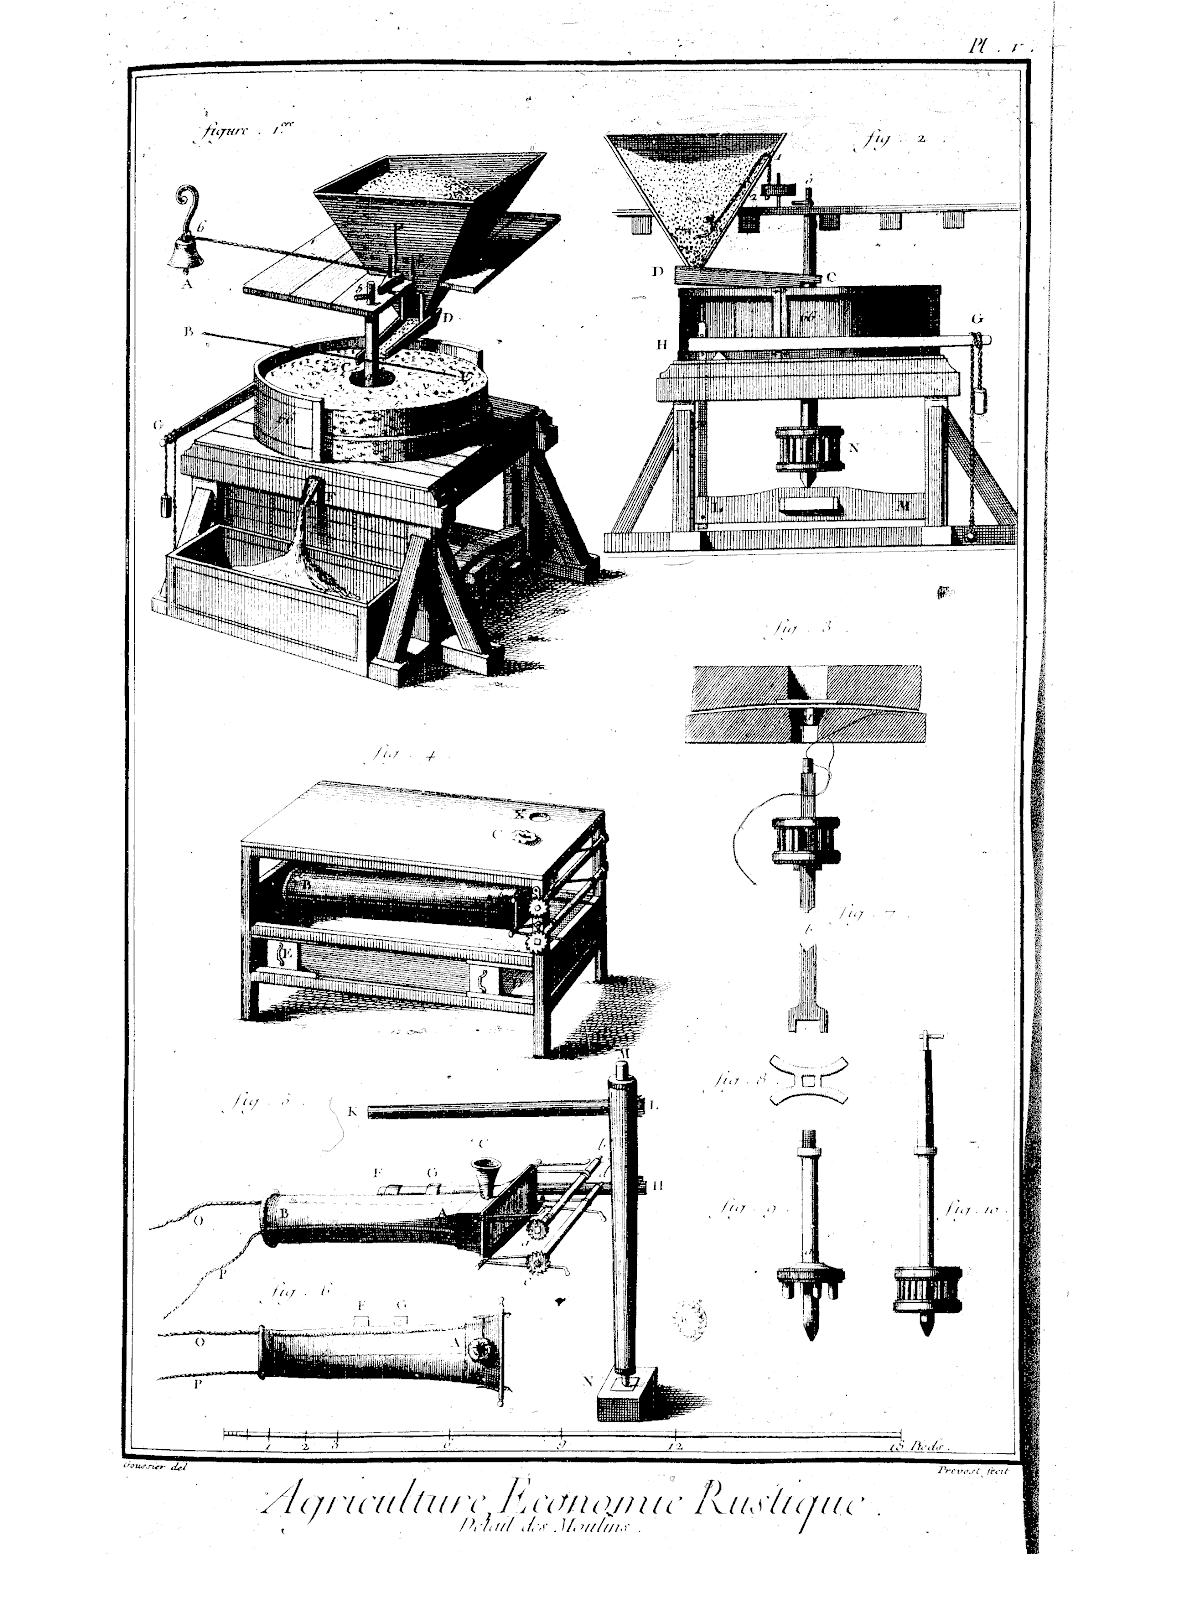 Technical diagram of agricultural equipment in one of the volumes of the Encyclopedia.